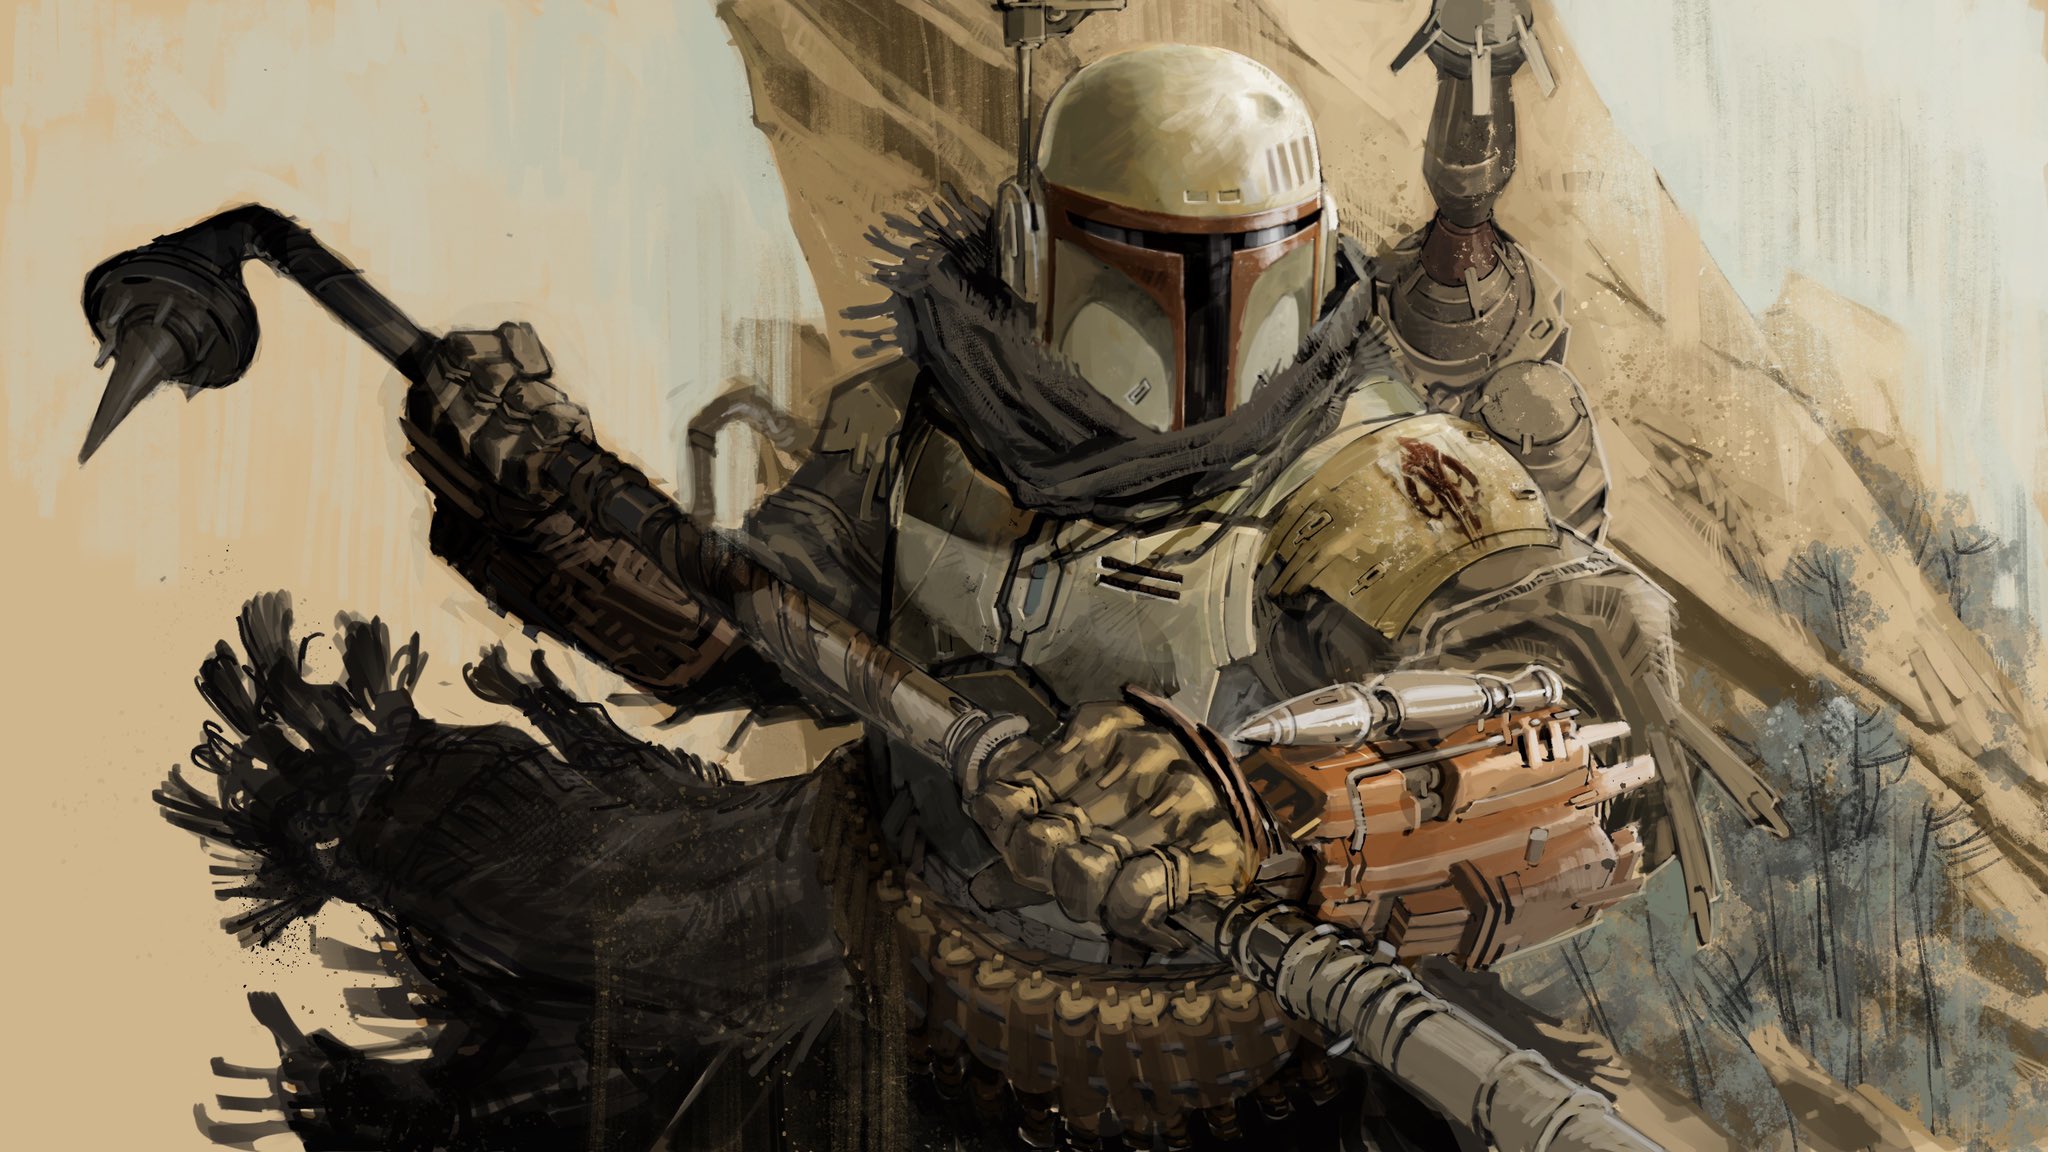 Wanna see me render and talk about this Boba Fett? 